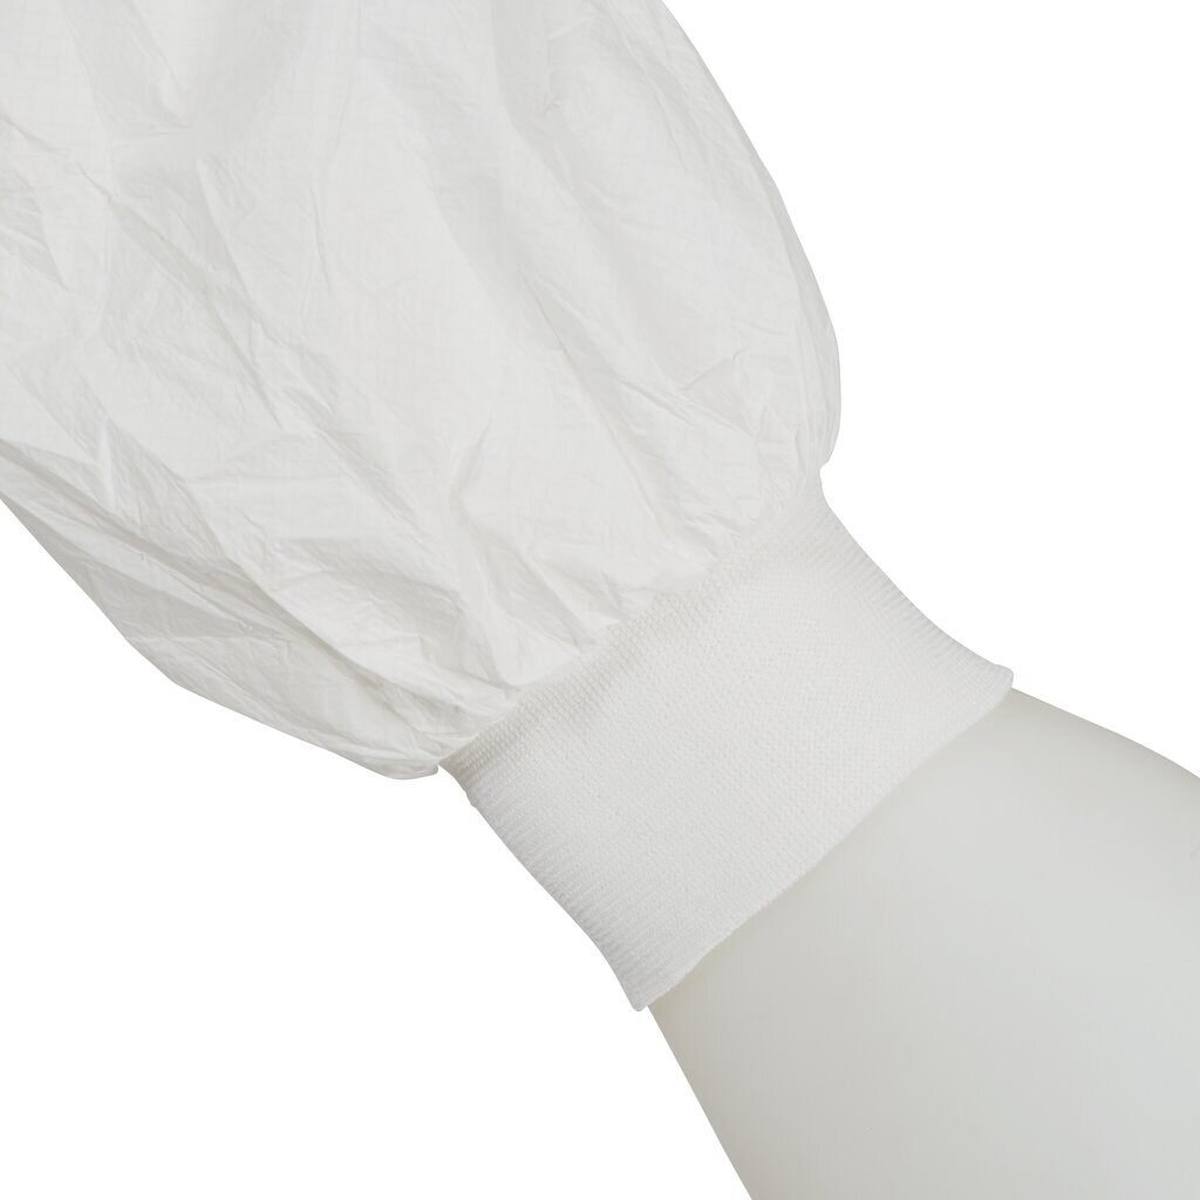 3M 4545 Protective coverall, white, TYPE 5/6, size 3XL, material PE laminate, antistatic coating, particularly low-linting, detachable zip, knitted cuffs